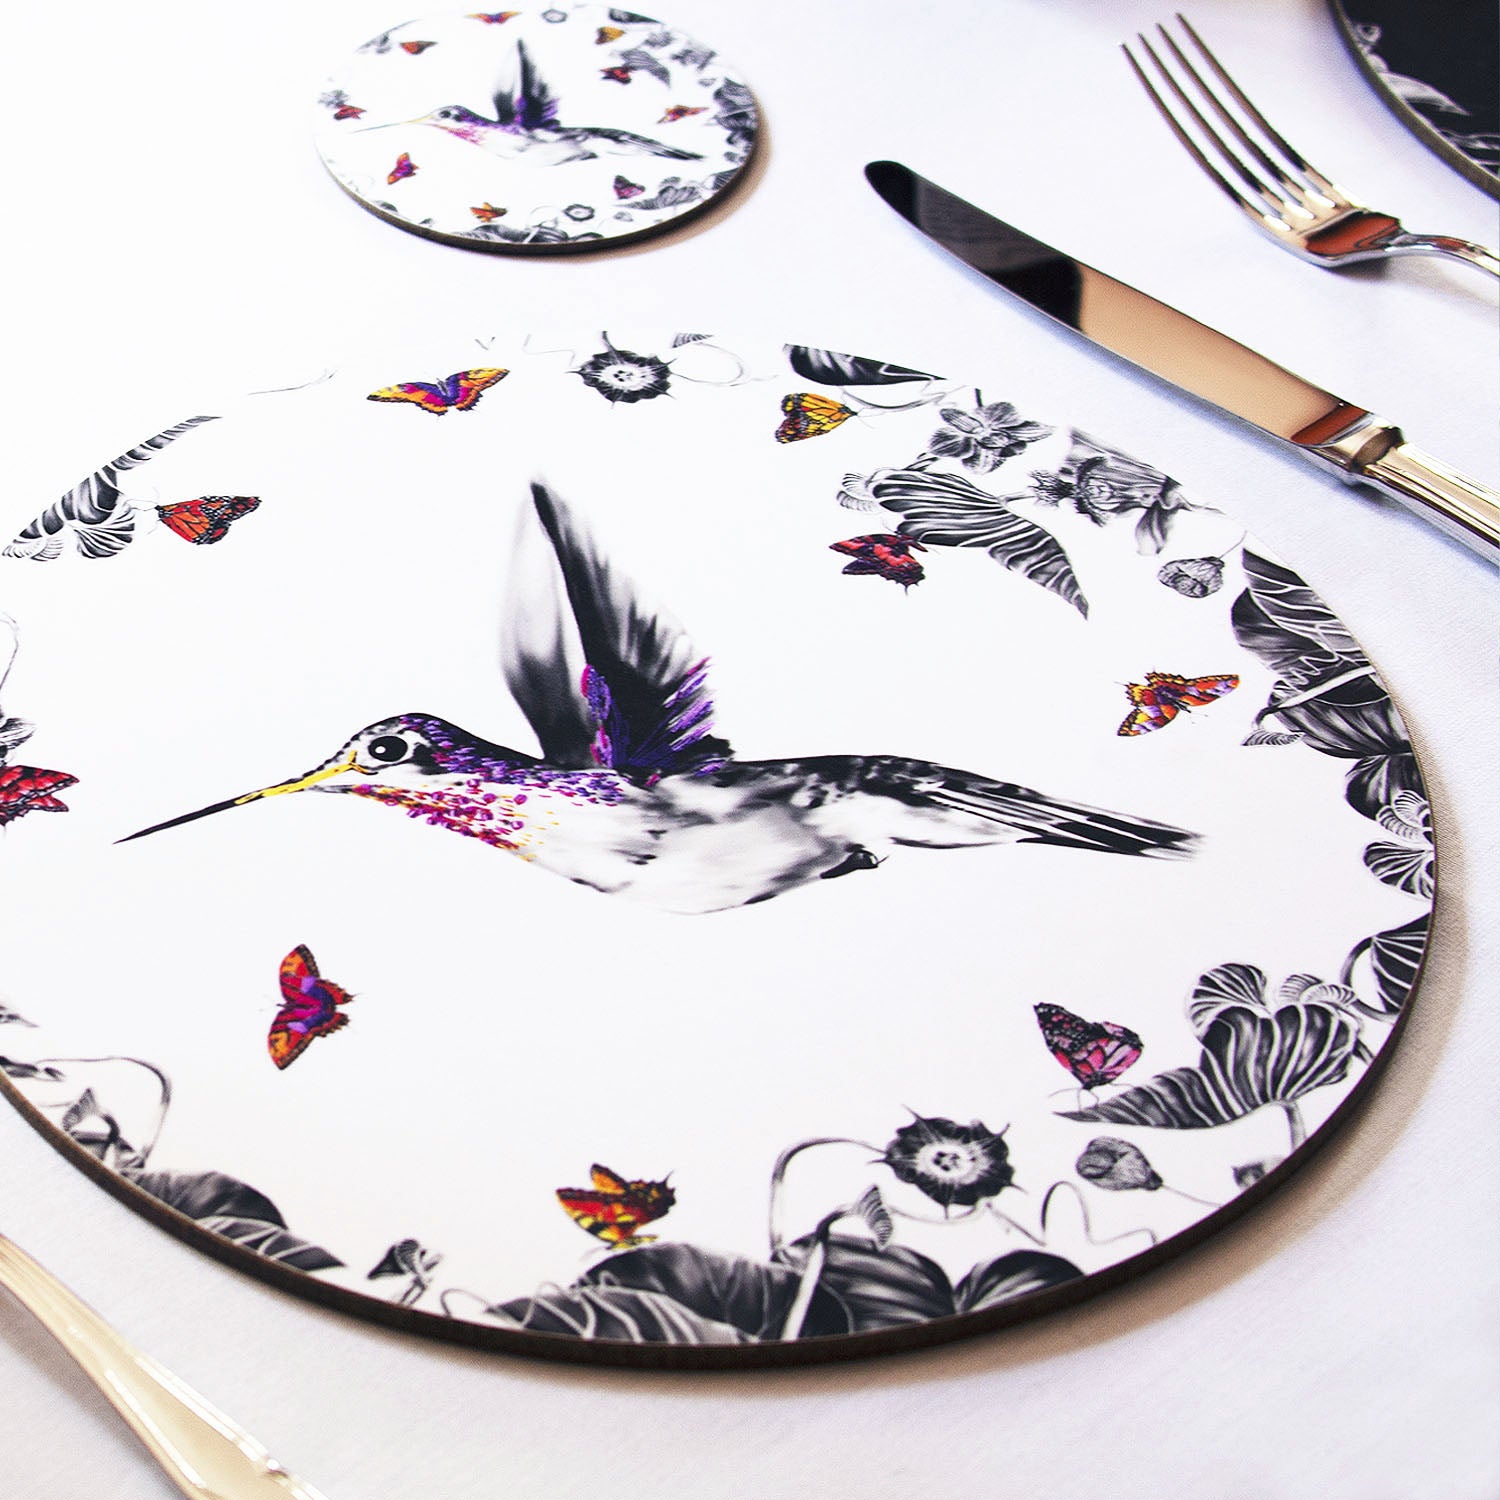 White hummingbird placemat in table setting